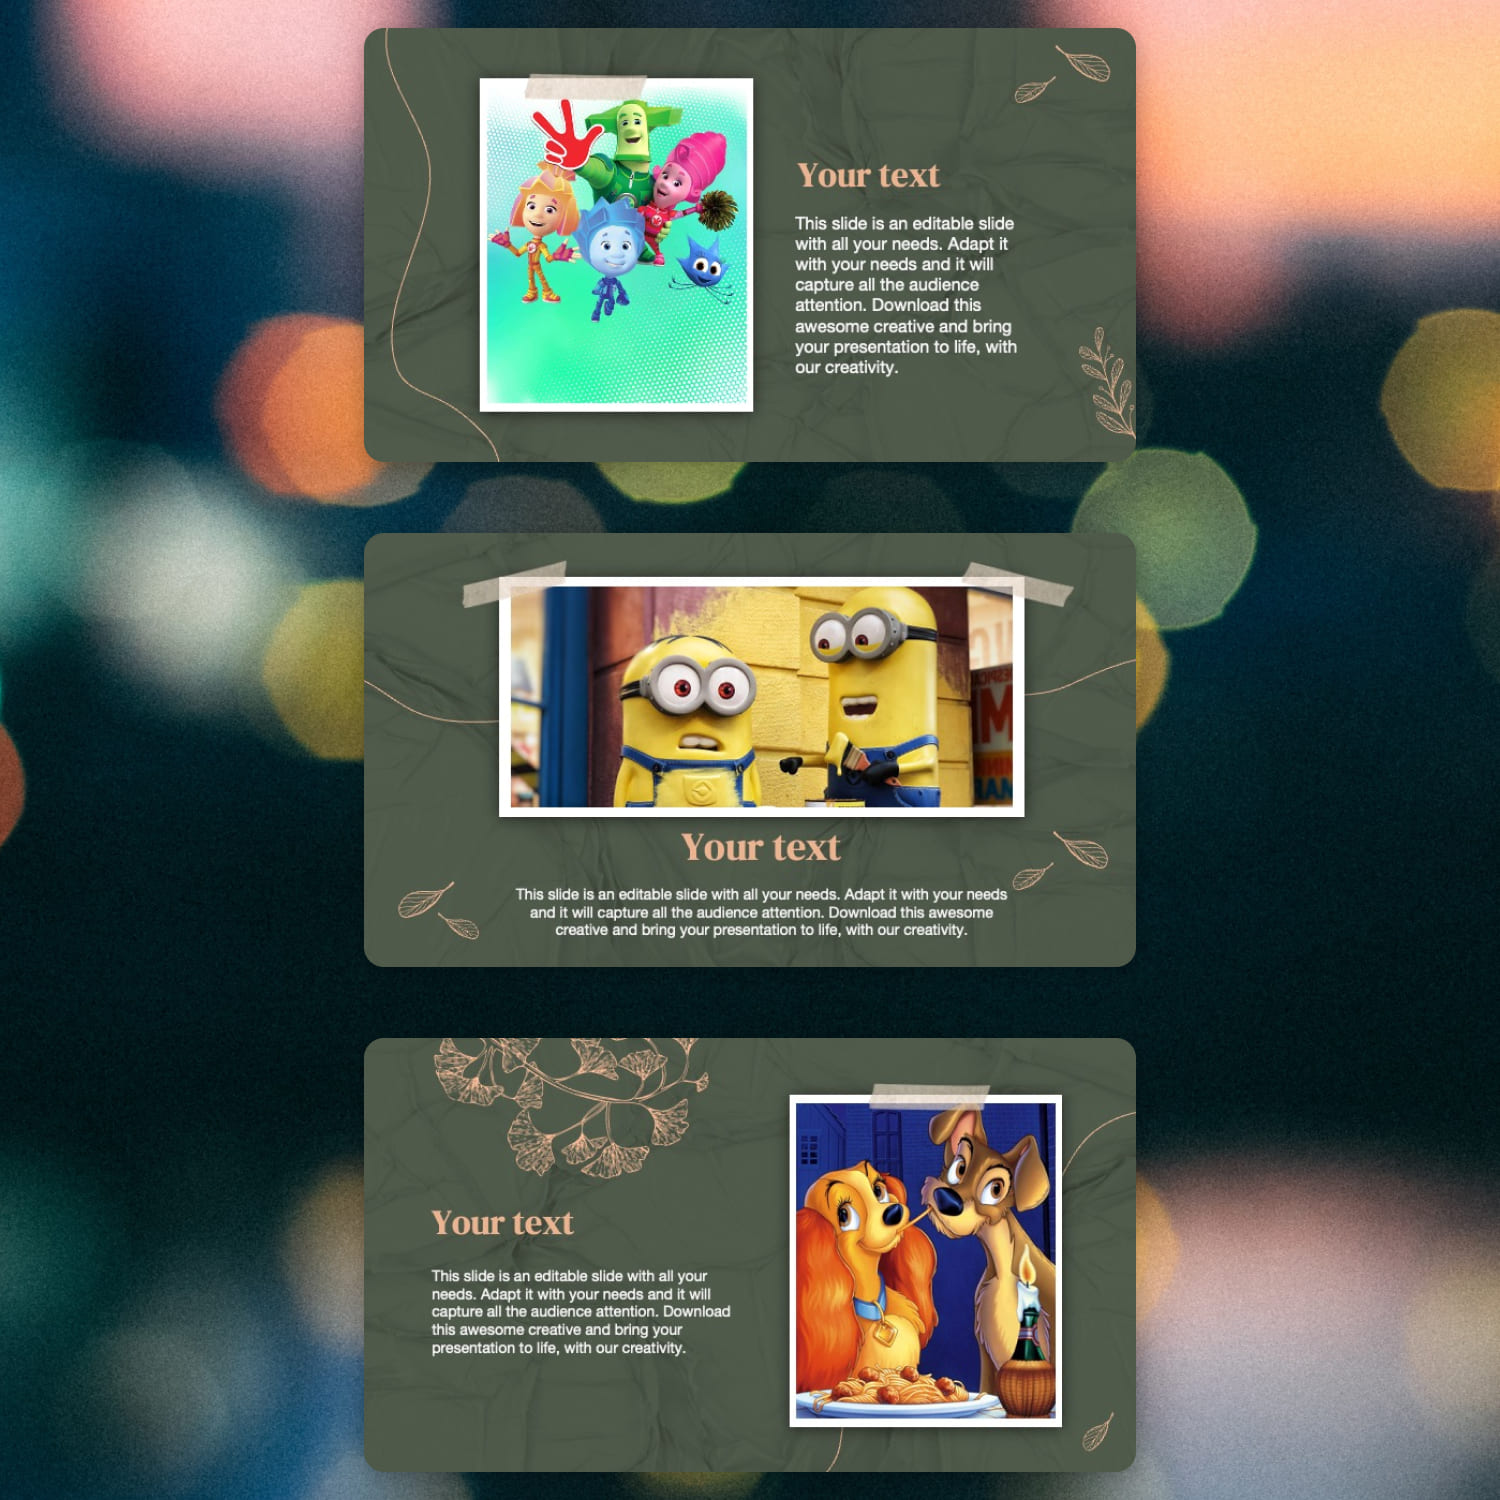 Fun Powerpoint Templates For Kids cover image.